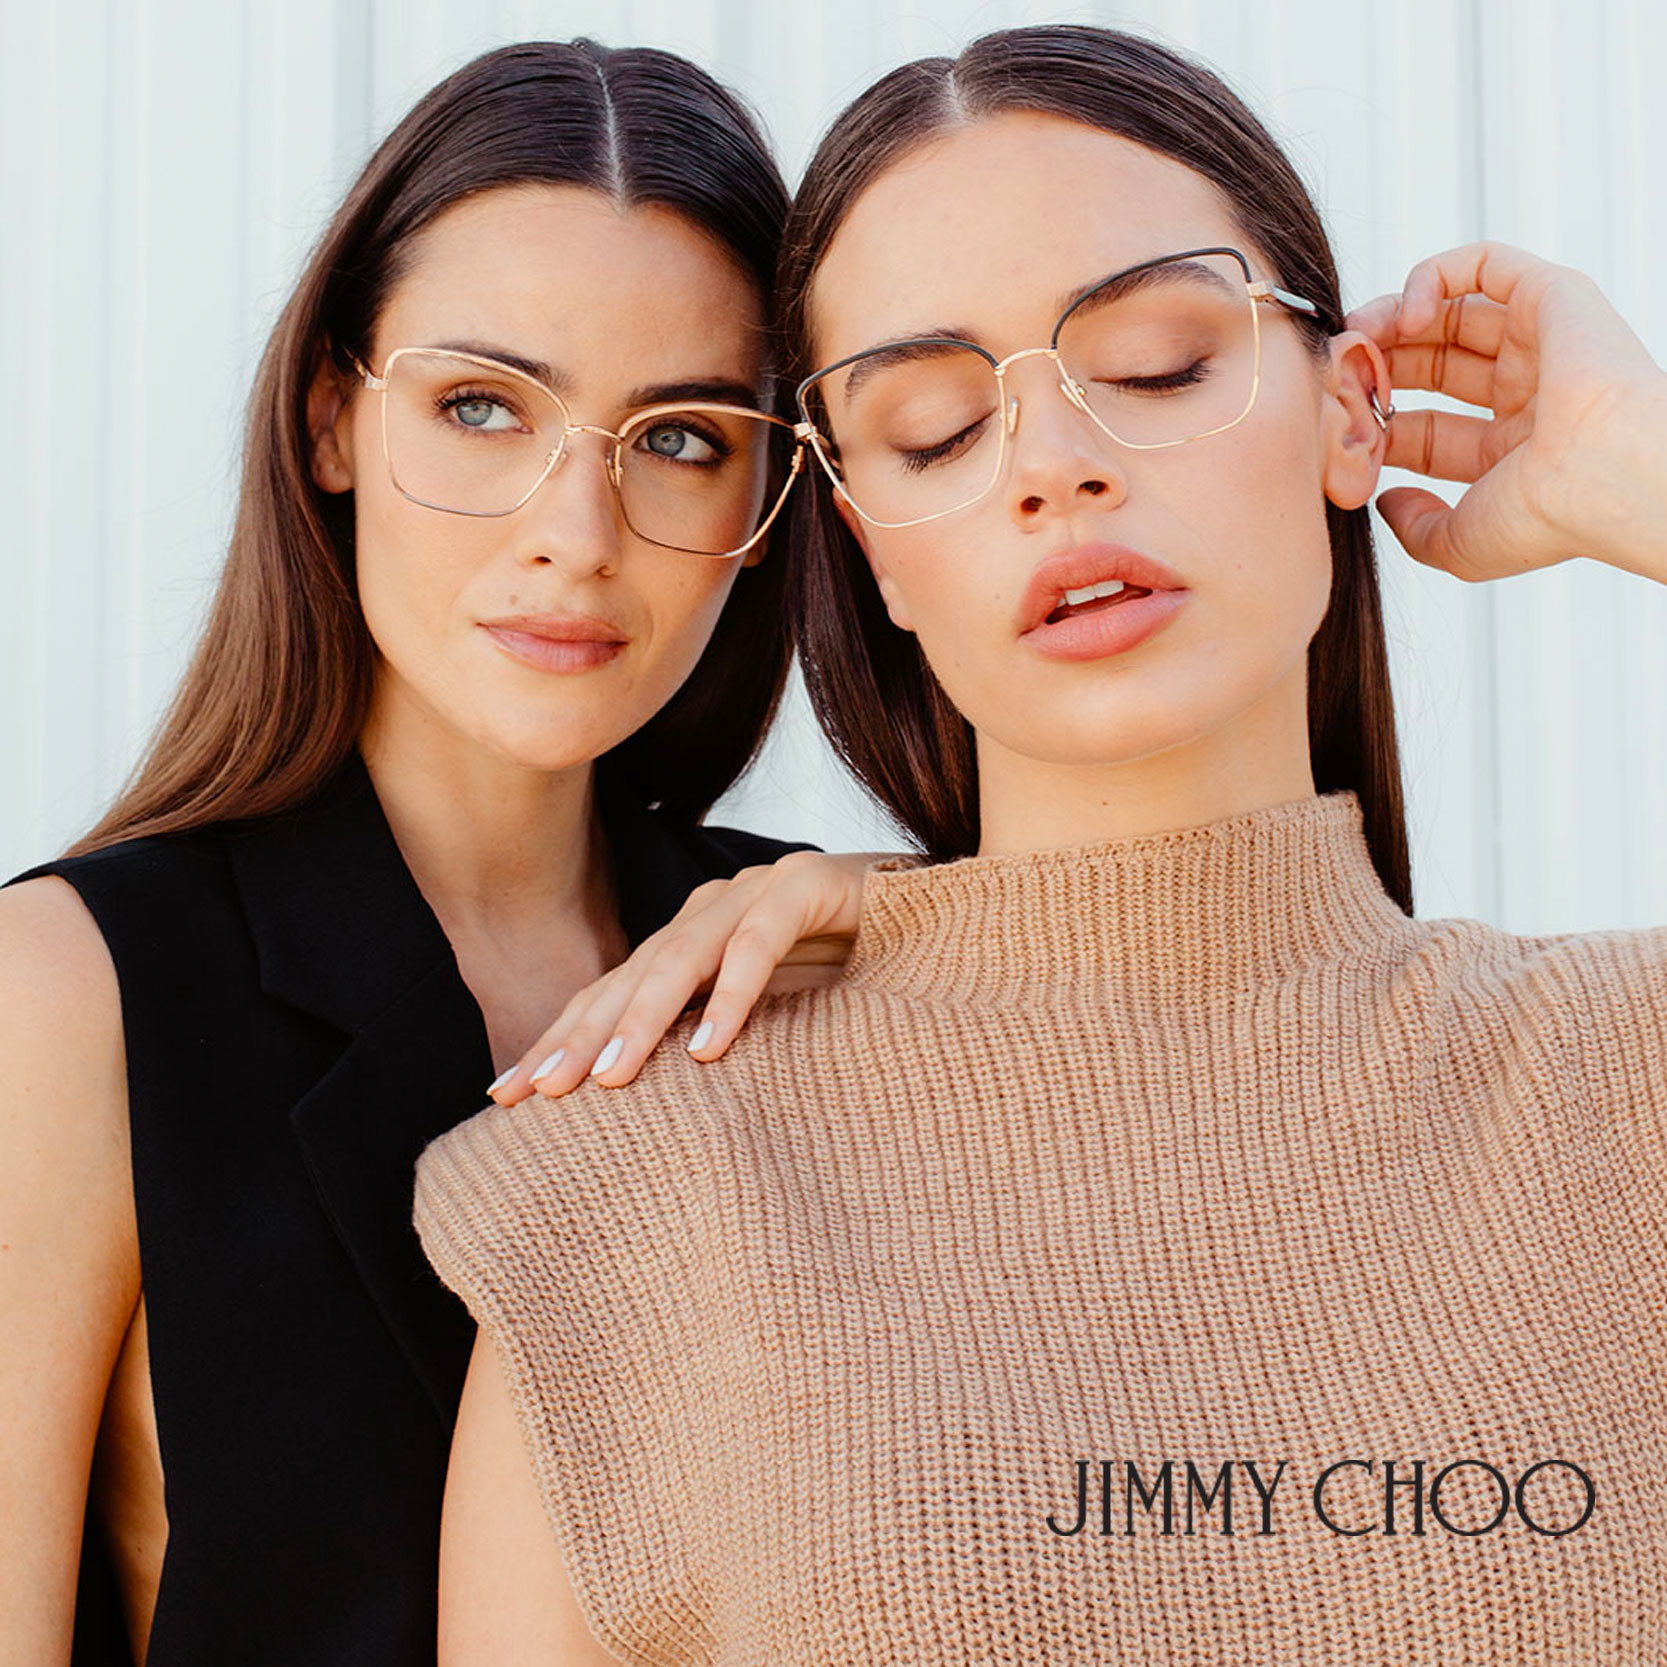 New Jimmy Choo Collection